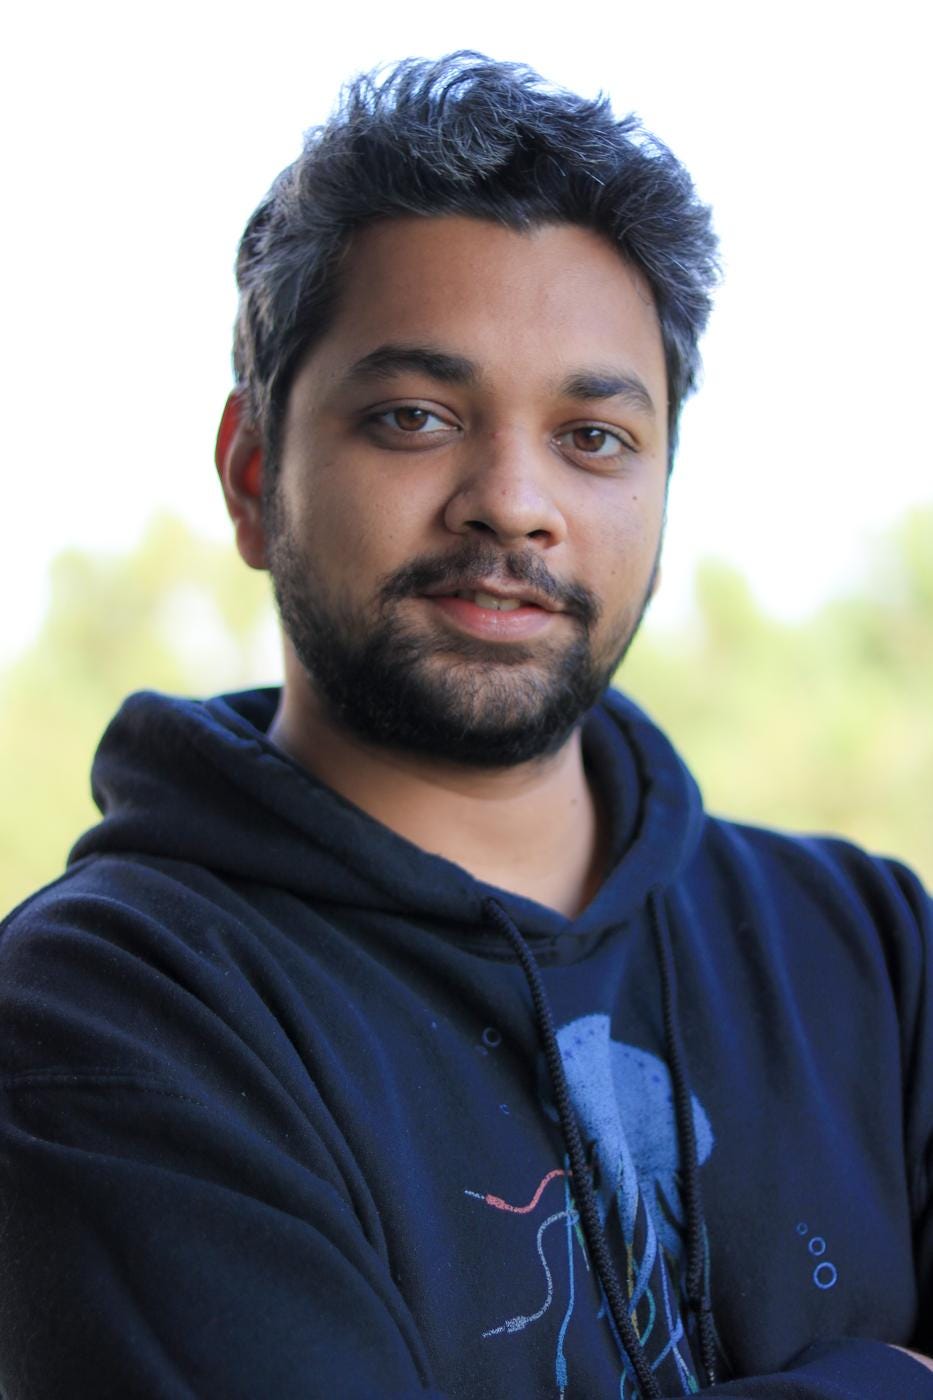 Headshot of Manaswi Mishra. He is looking directly into the camera, and wearing a blue hoodie with a colorful logo that looks like an octopus made of electronic components.